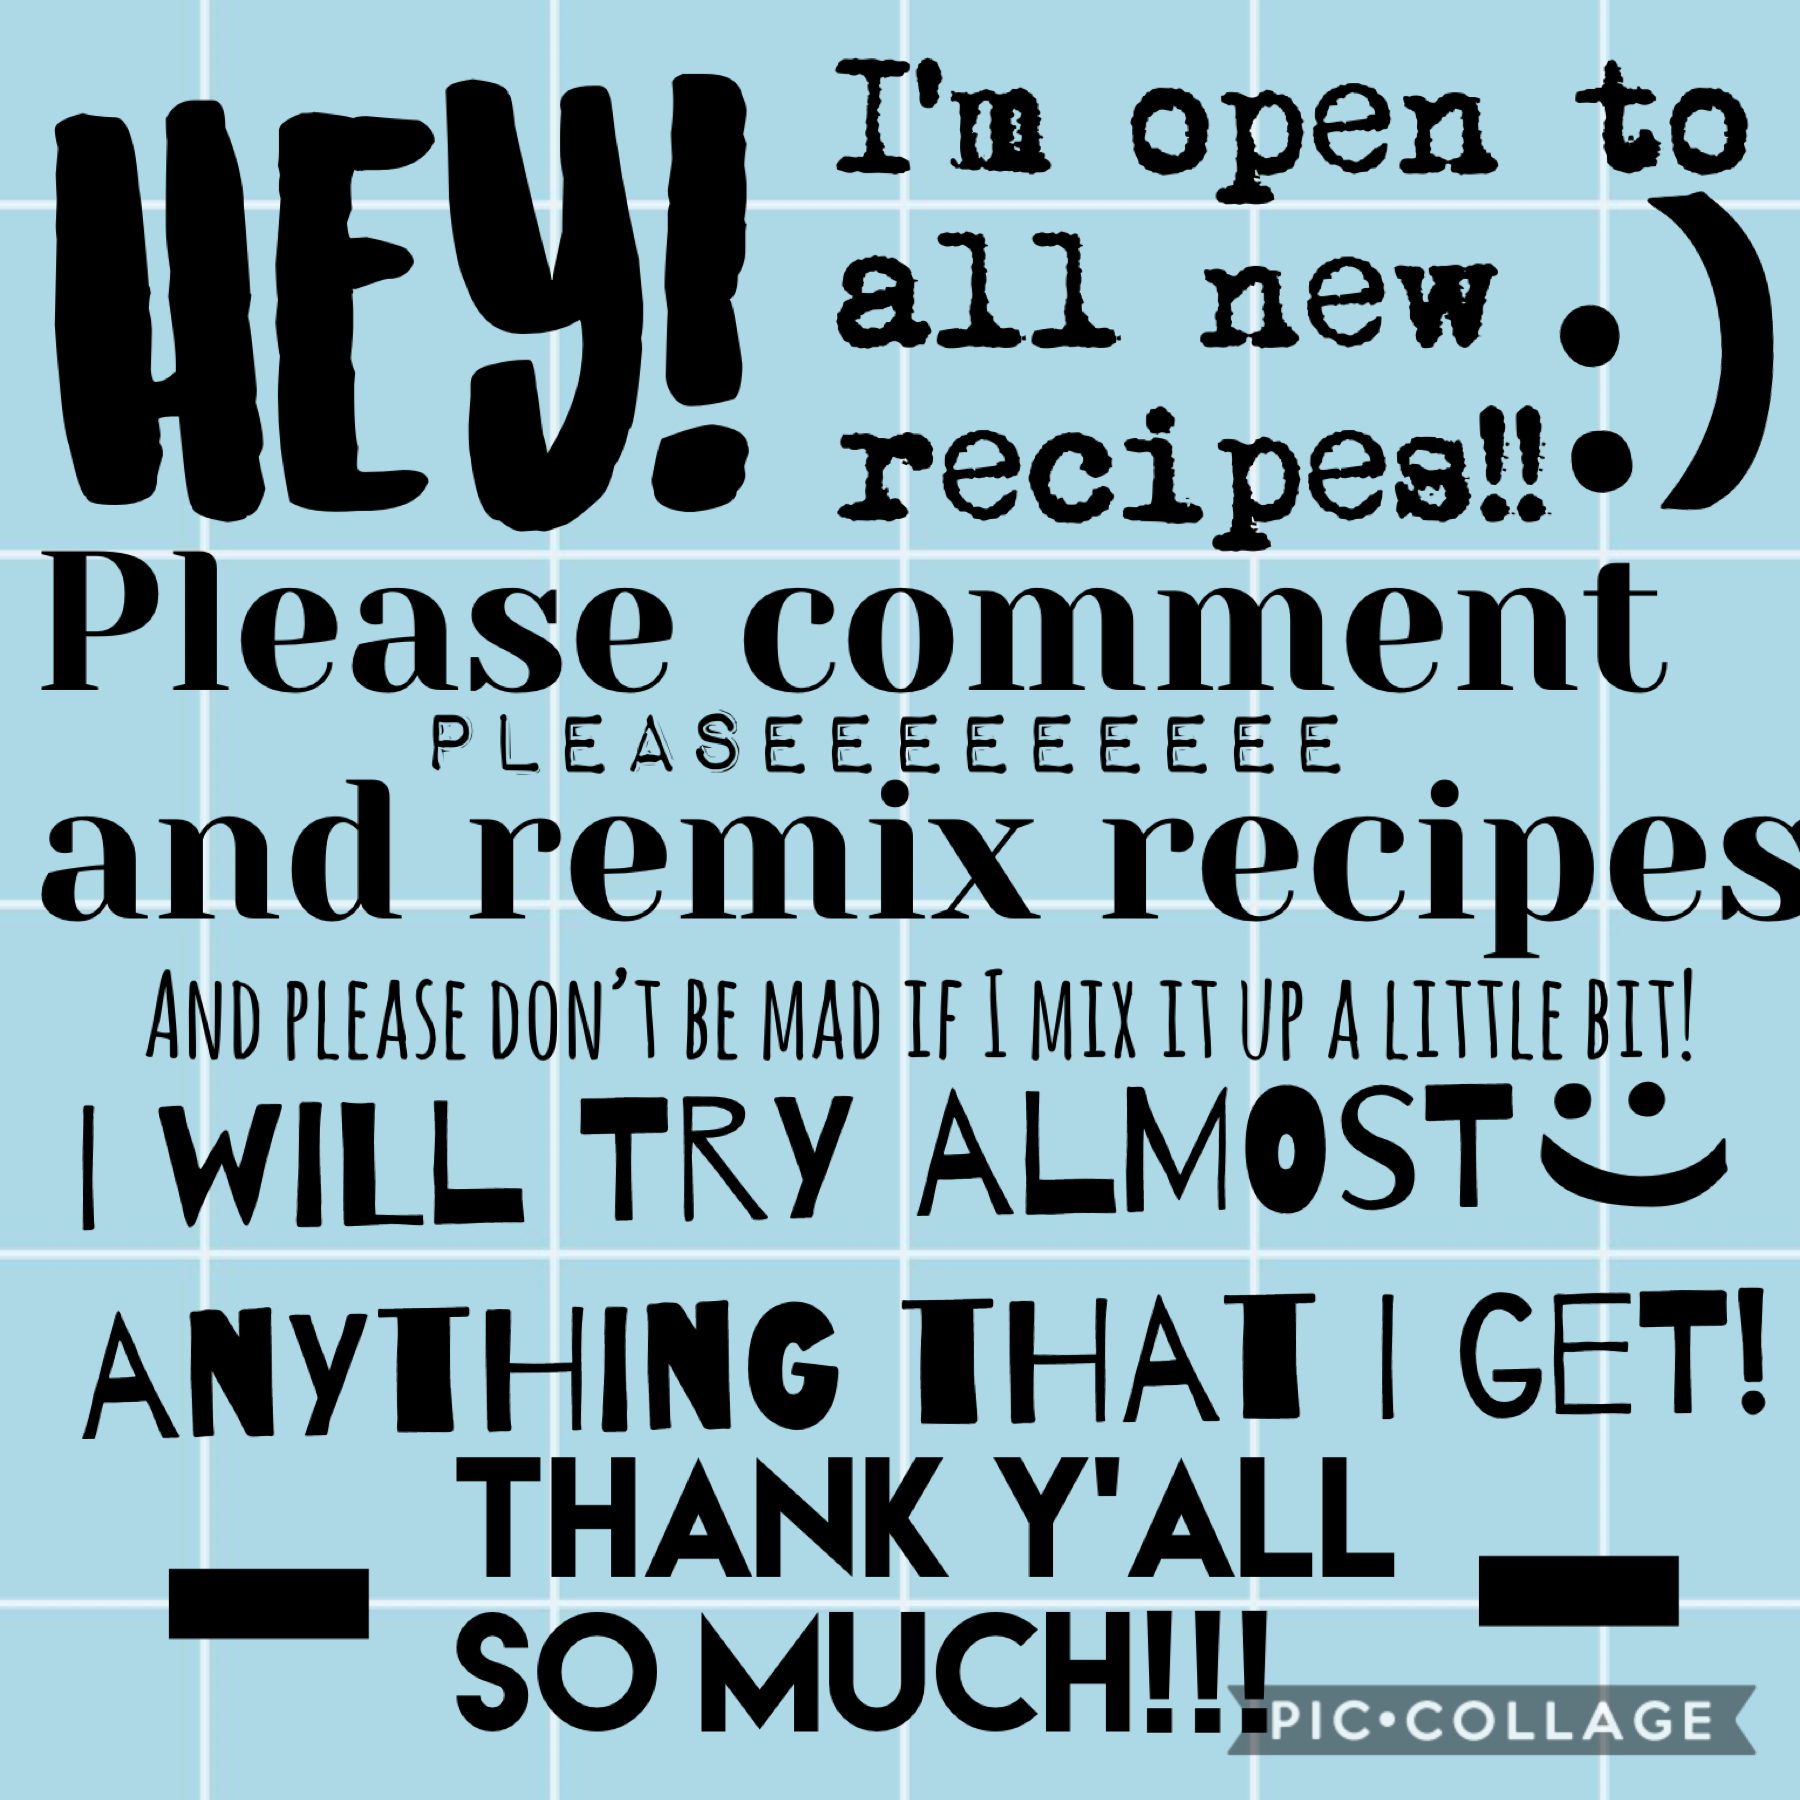 Please comment and remix some recipes!!!!!! ❤️❤️❤️❤️❤️❤️❤️❤️